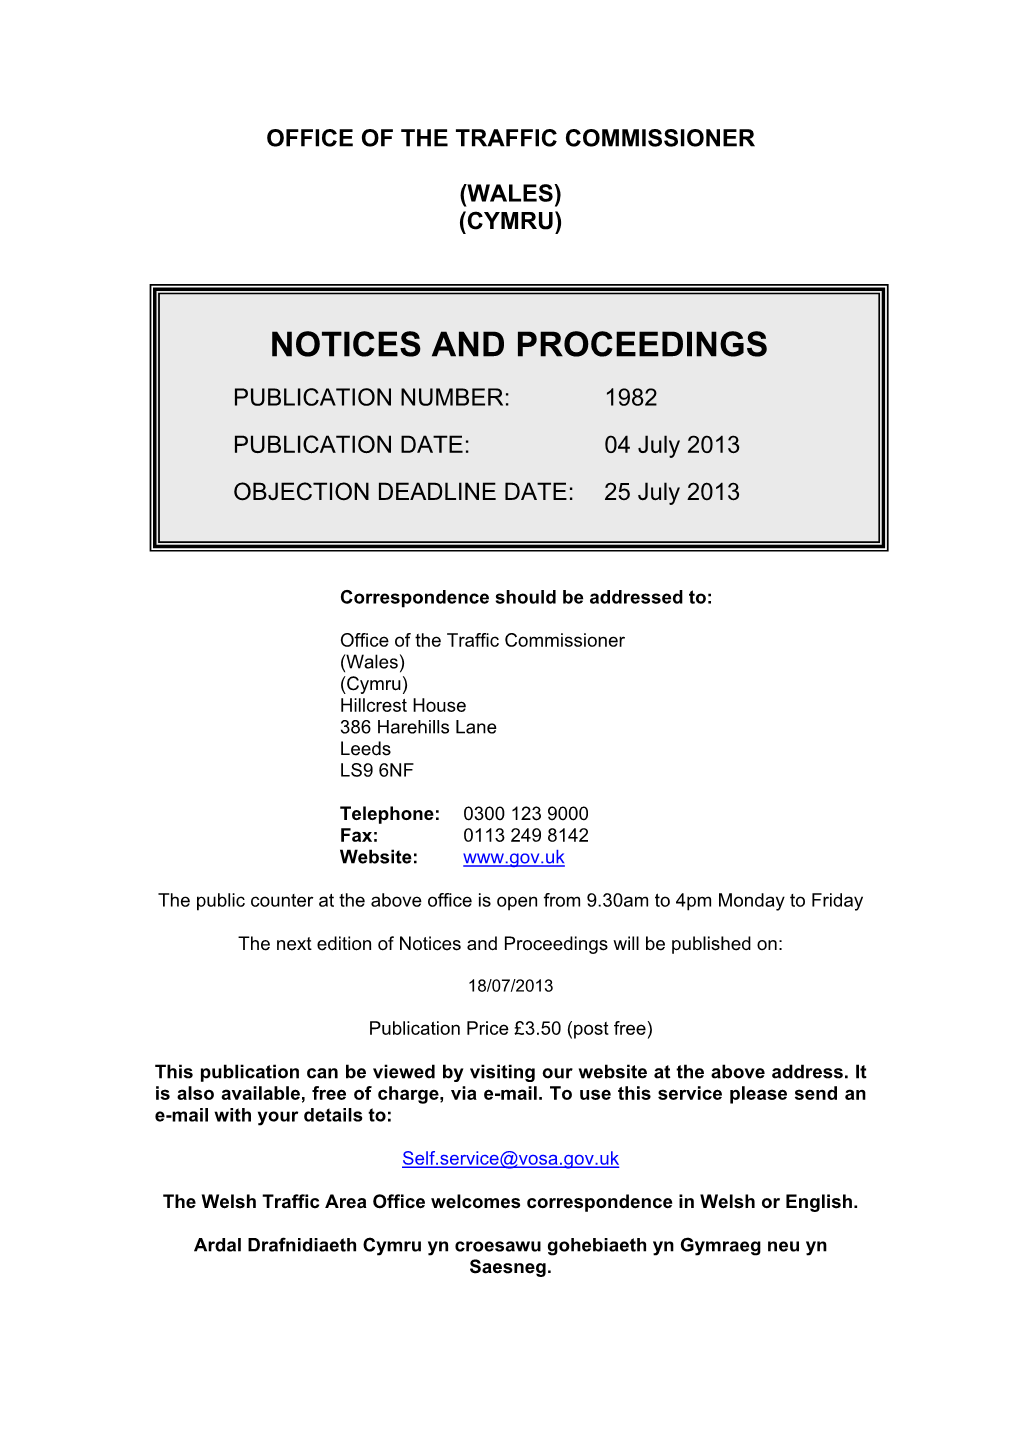 Notices and Proceedings: Wales: Objection Deadline 25 July 2013